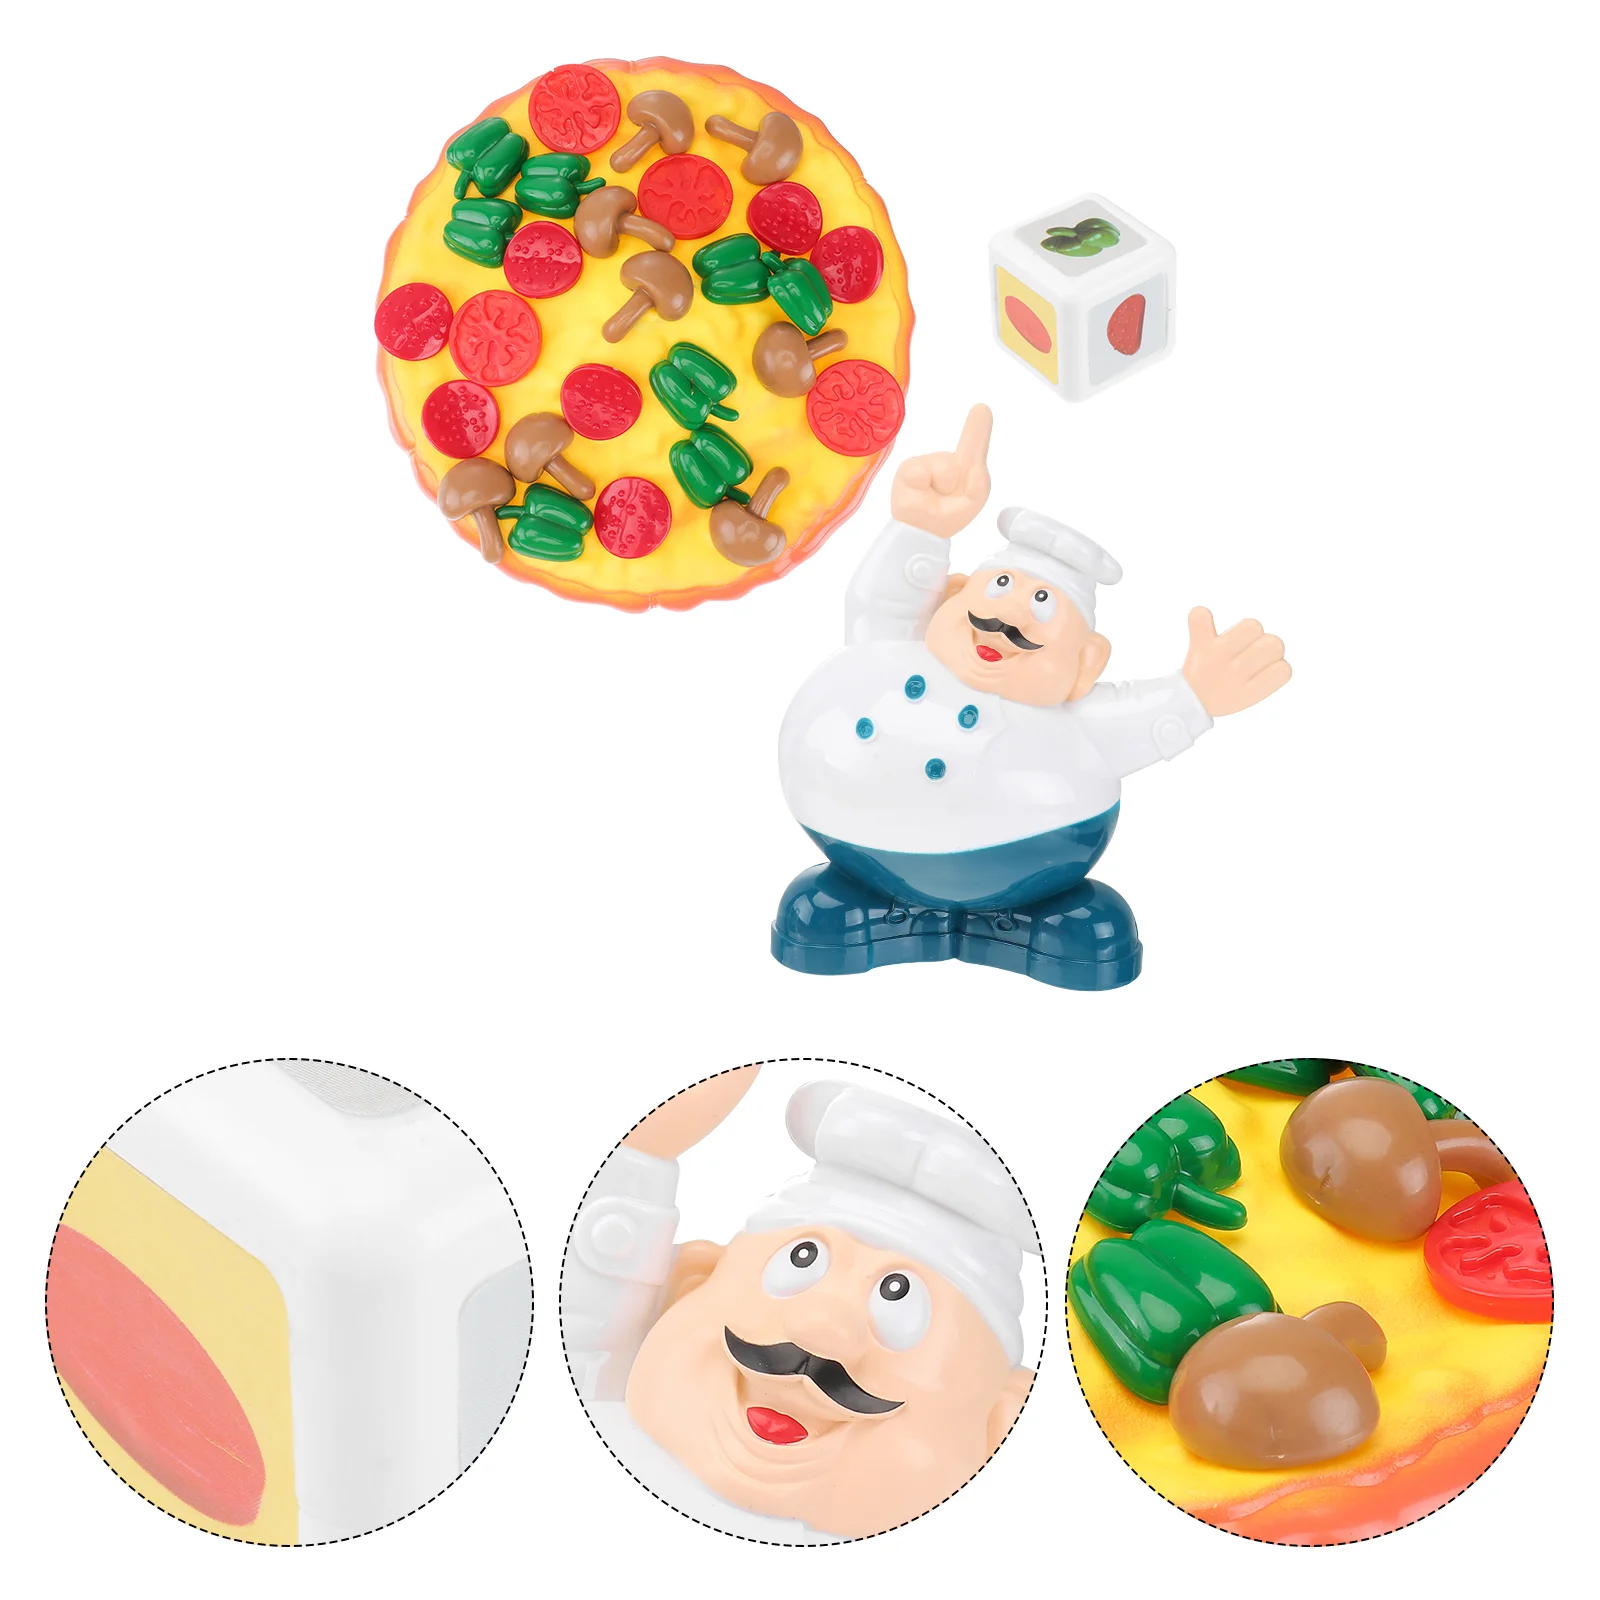 

Stacking Pizza Toys Balancing Game with Chef Model Vegetable Dice Interactive Stacker Puzzle Early Educational Toys for Kids